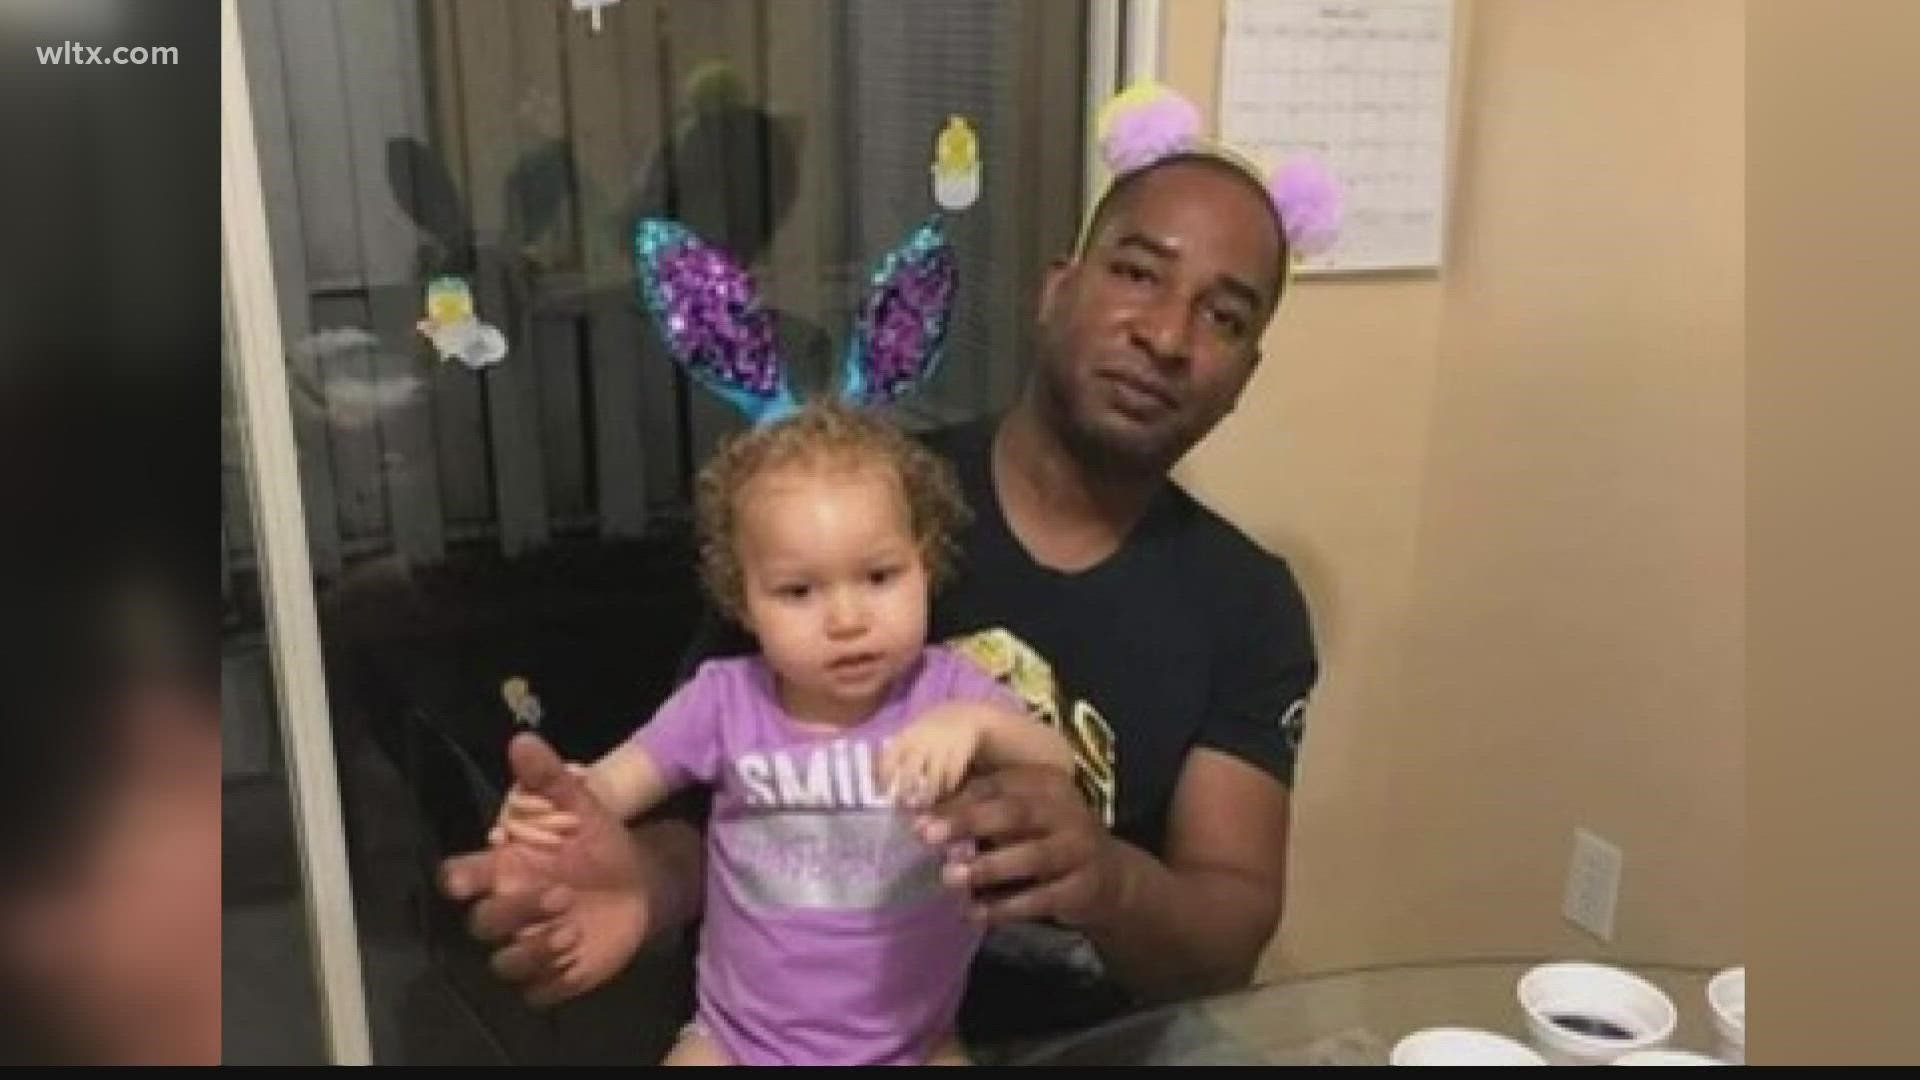 Aspen Jeter was missing after her mother was found dead at their home in Orangeburg, she was found with  her father in Virginia.